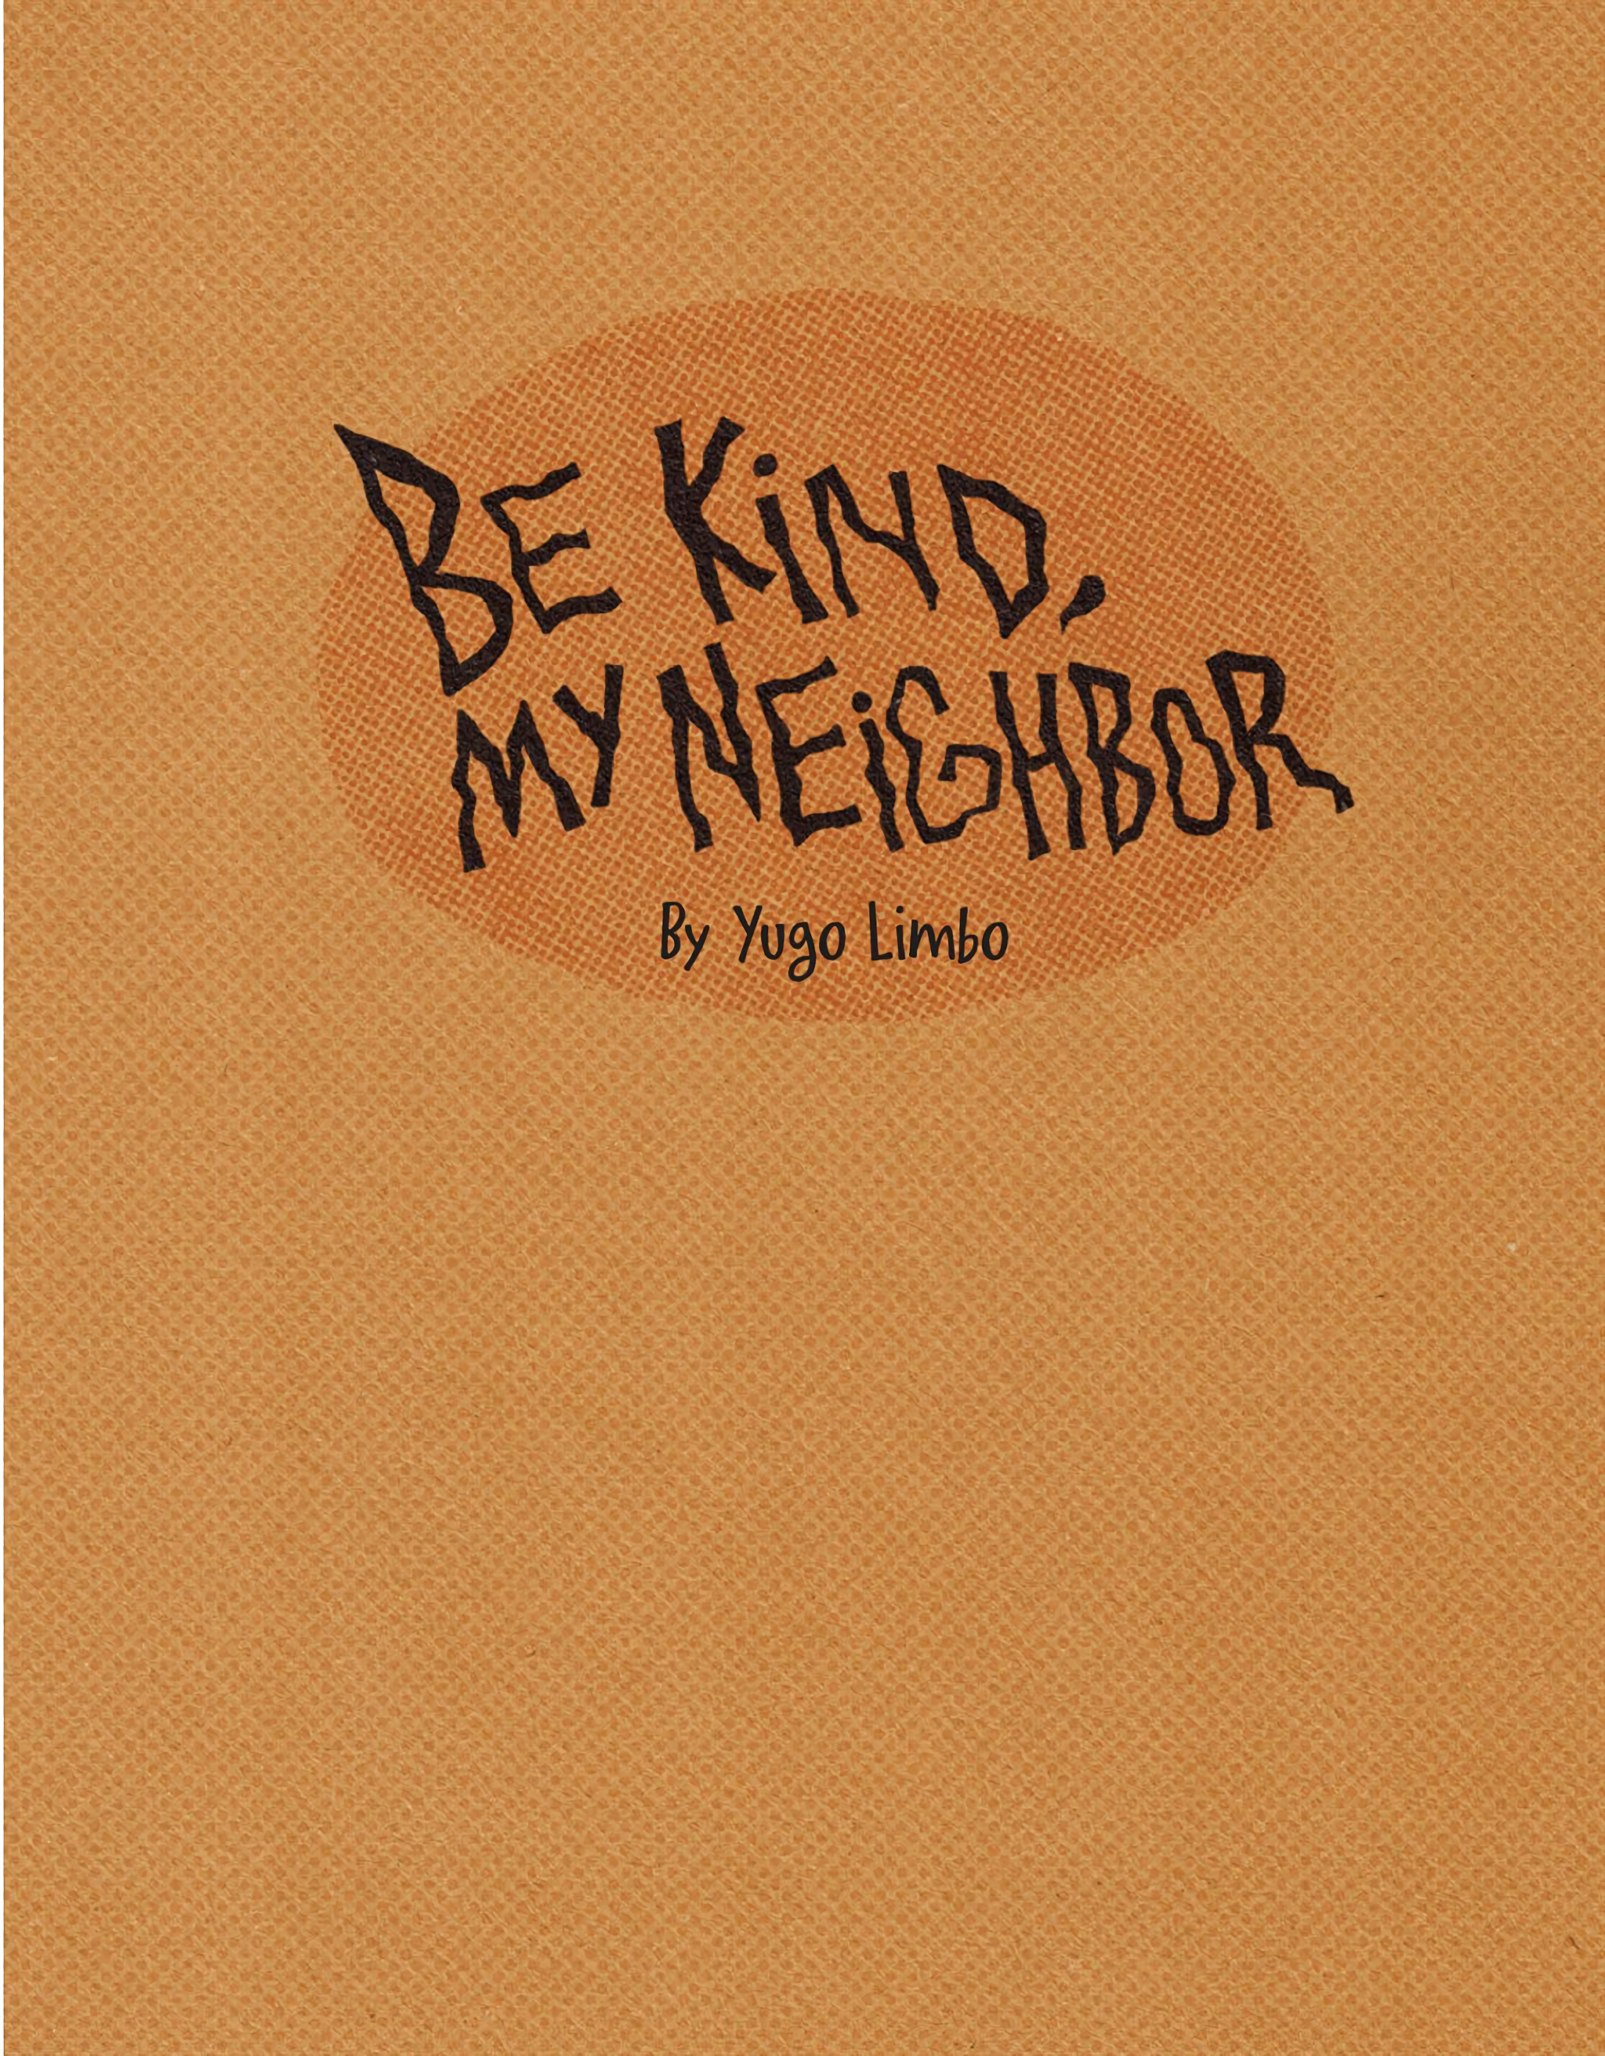 Read online Be Kind, My Neighbor comic -  Issue # TPB (Part 1) - 3